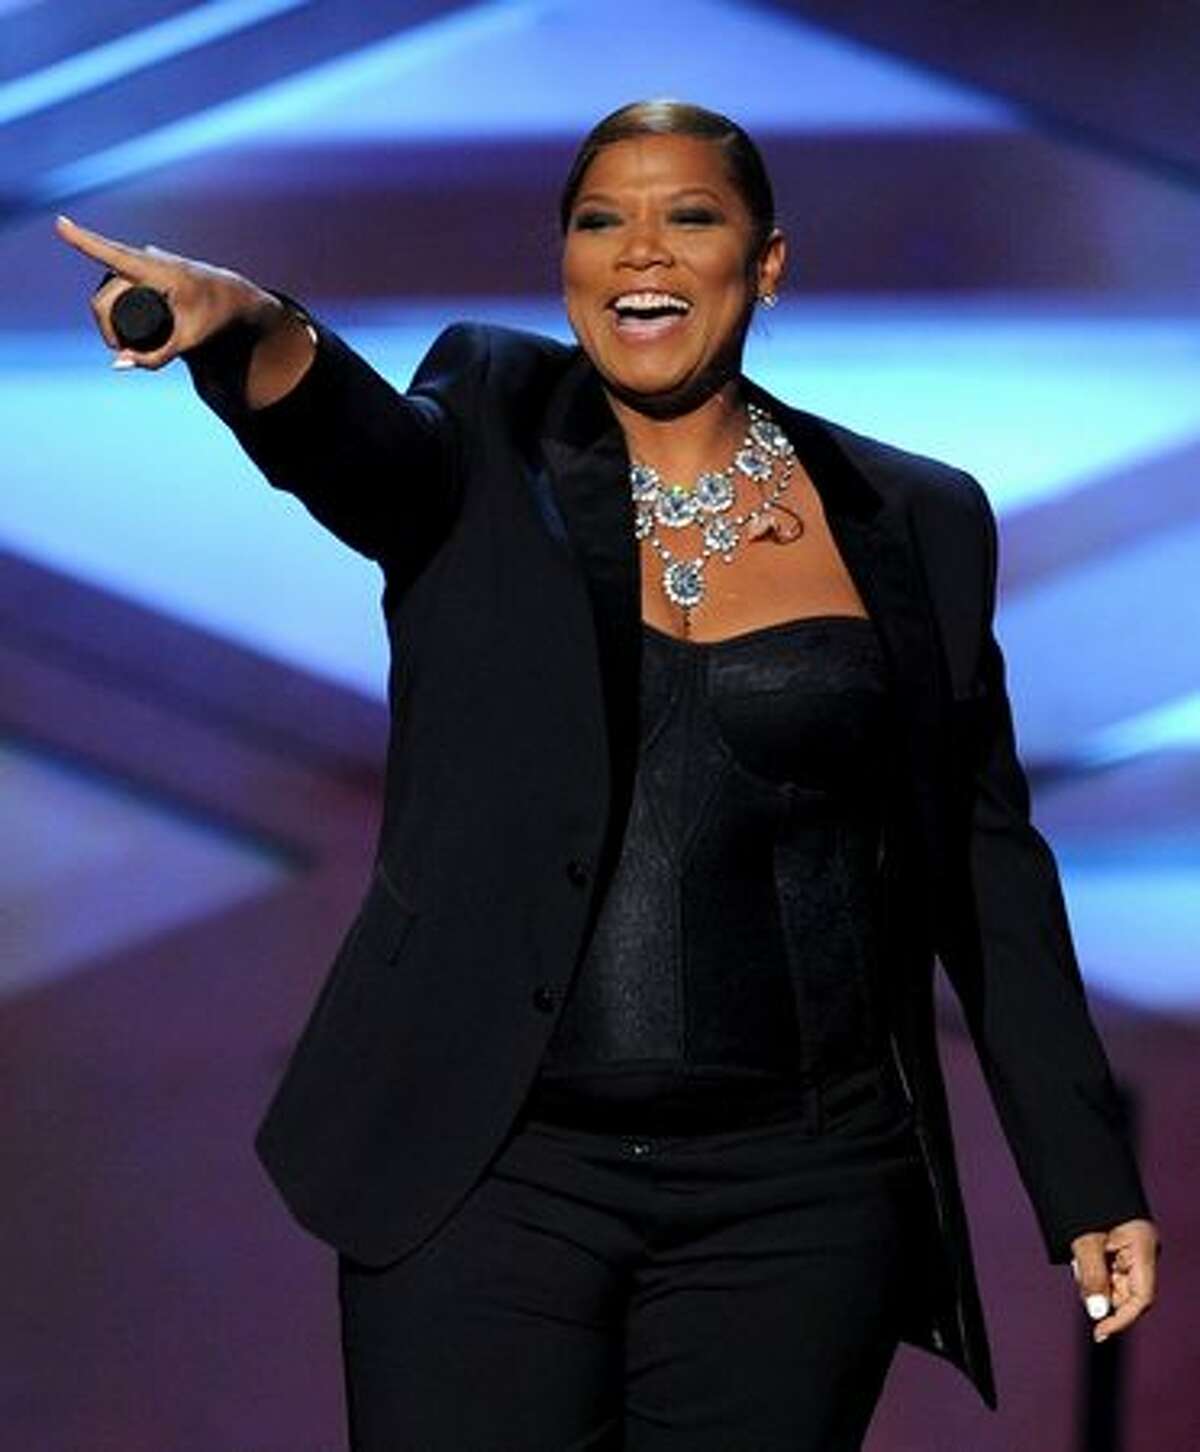 Host Queen Latifah speaks onstage during the 2011 People's Choice Awards at Nokia Theatre L.A. Live in Los Angeles, California.